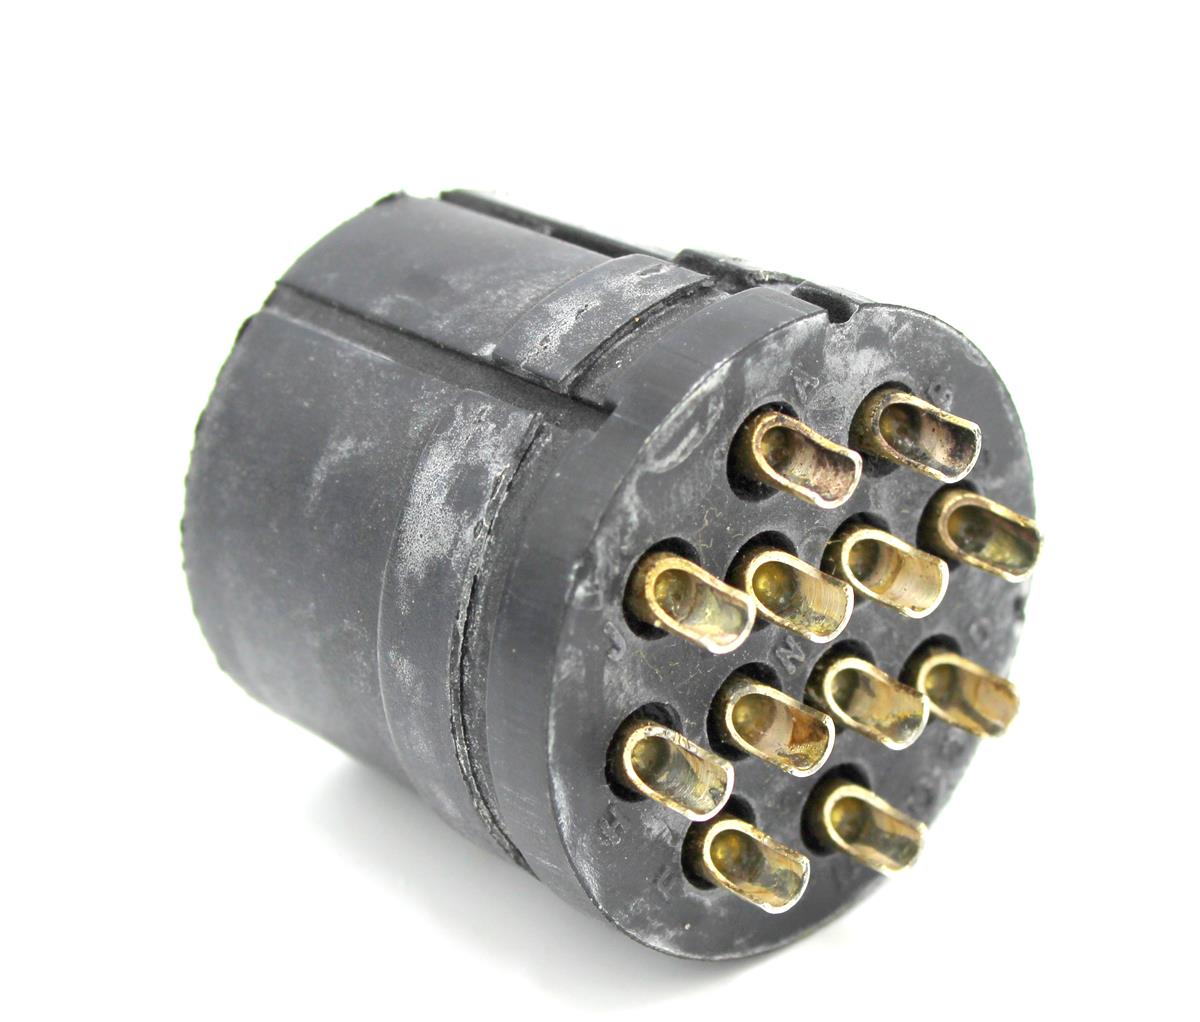 TR-342 | TR-342 Trailer Wiring Connector Plug (Female) Military Common Application (6).JPG